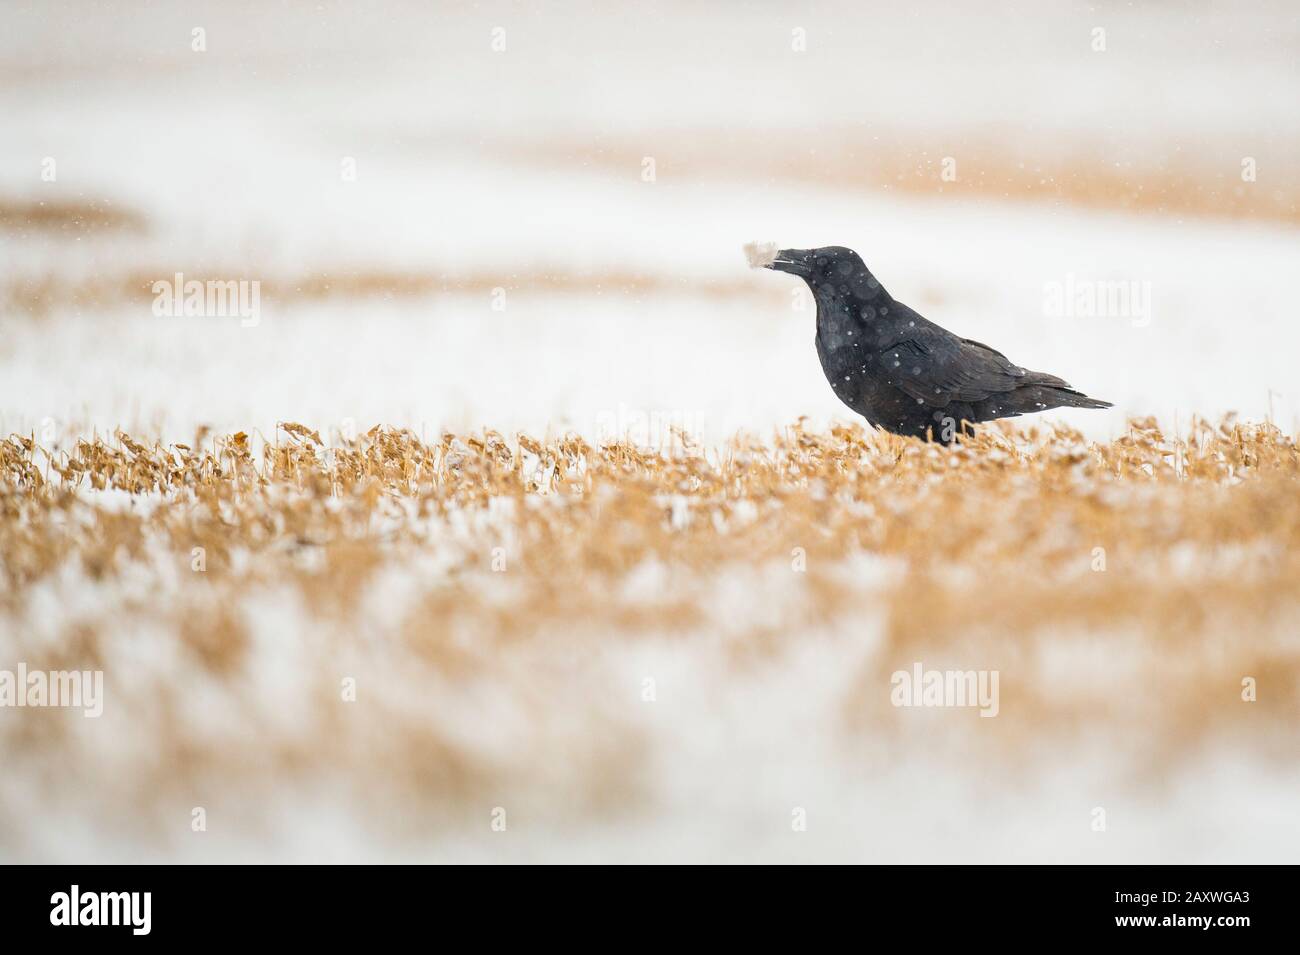 A Common Raven sitting on the ground in an open field on a cold snowy day. Stock Photo